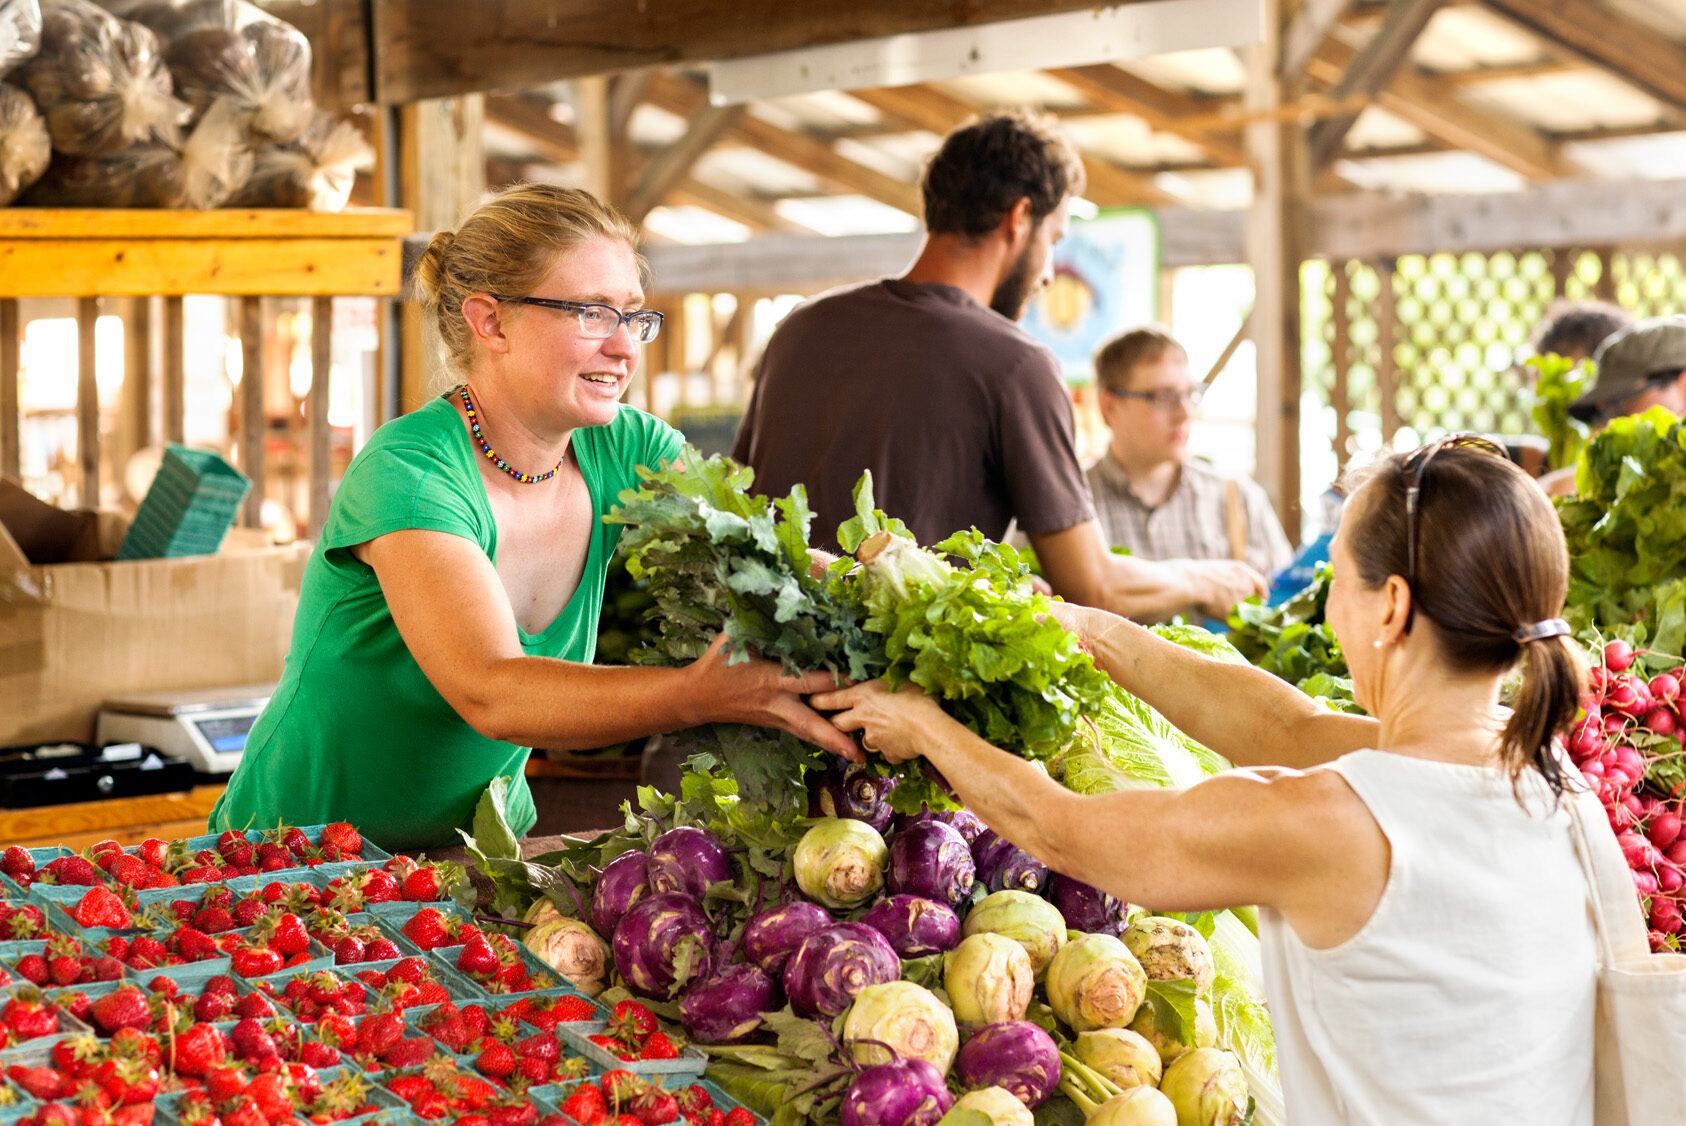 A customer buys produce in one of the region's many farmer's markets